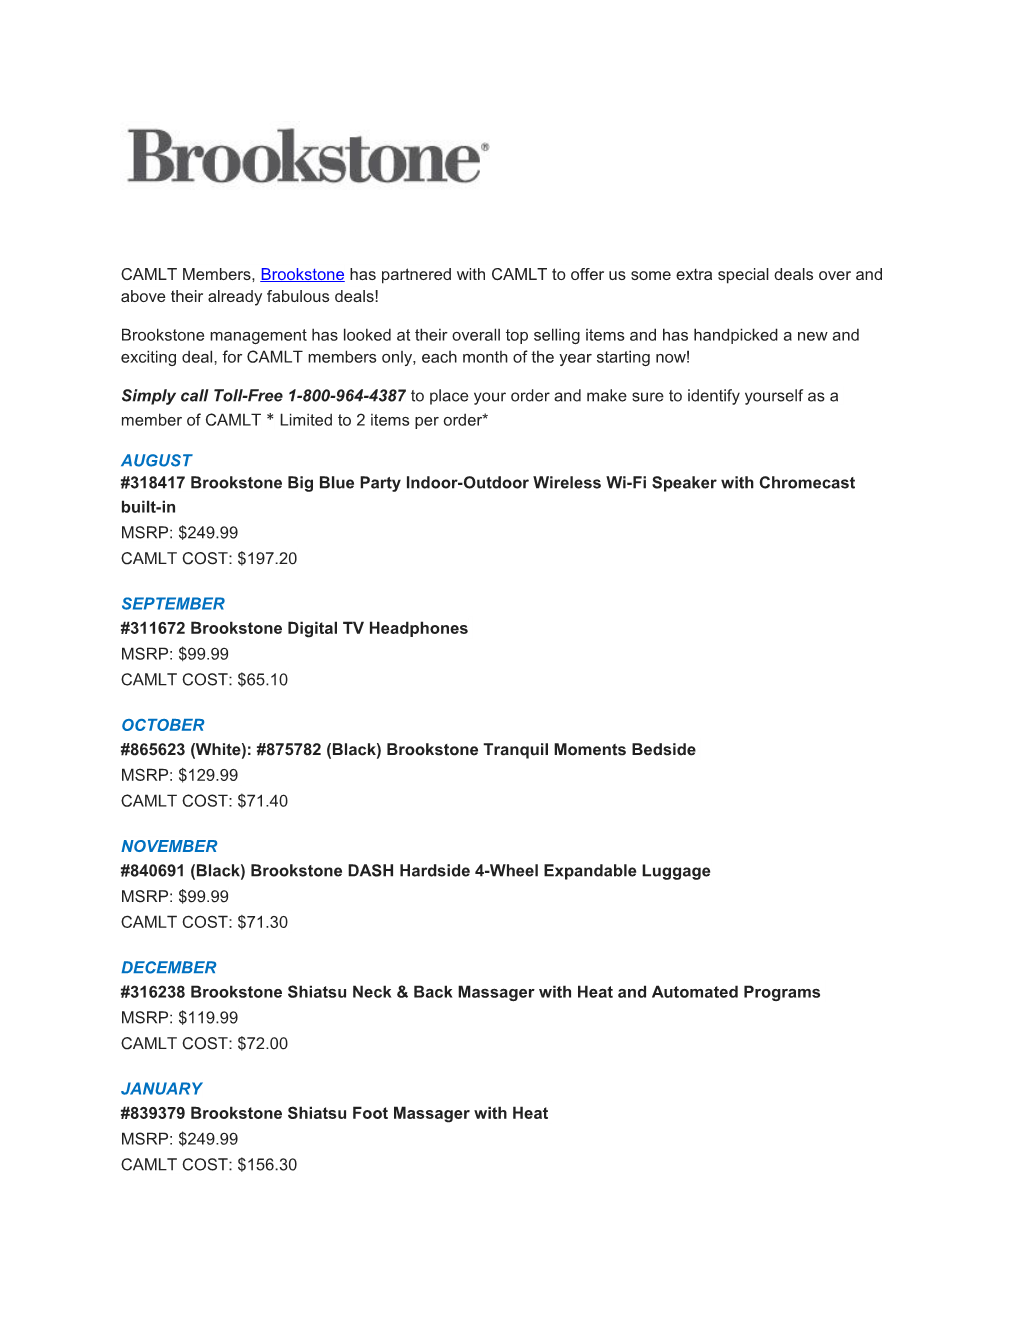 CAMLT Members, Brookstone Has Partnered with CAMLT to Offer Us Some Extra Special Deals